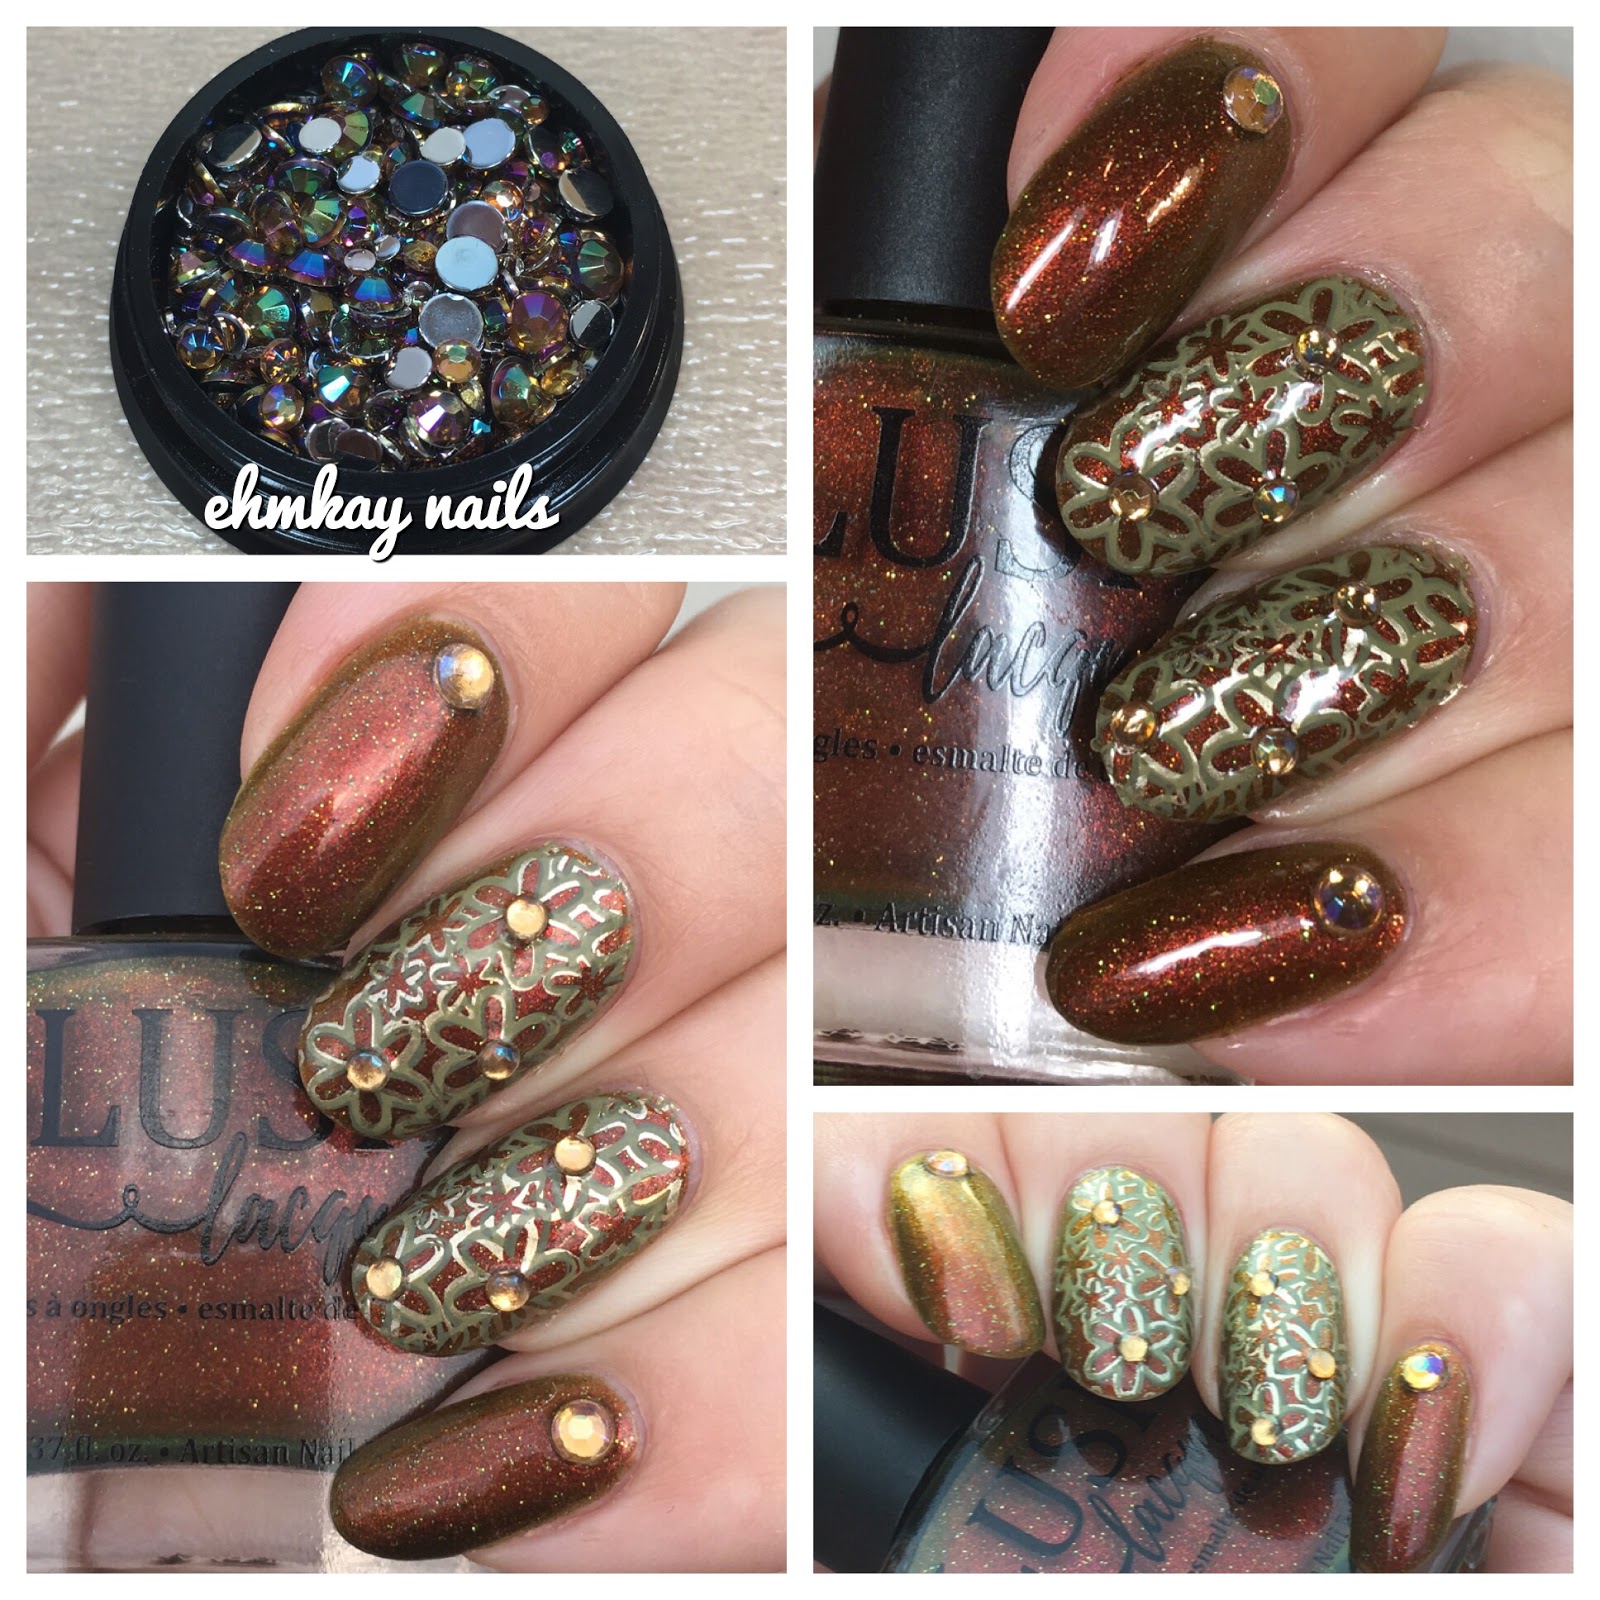 ehmkay nails: Blush Lacquer The Golden Hour with Floral Stamping and Beauty  Big Bang Multichrome Gems